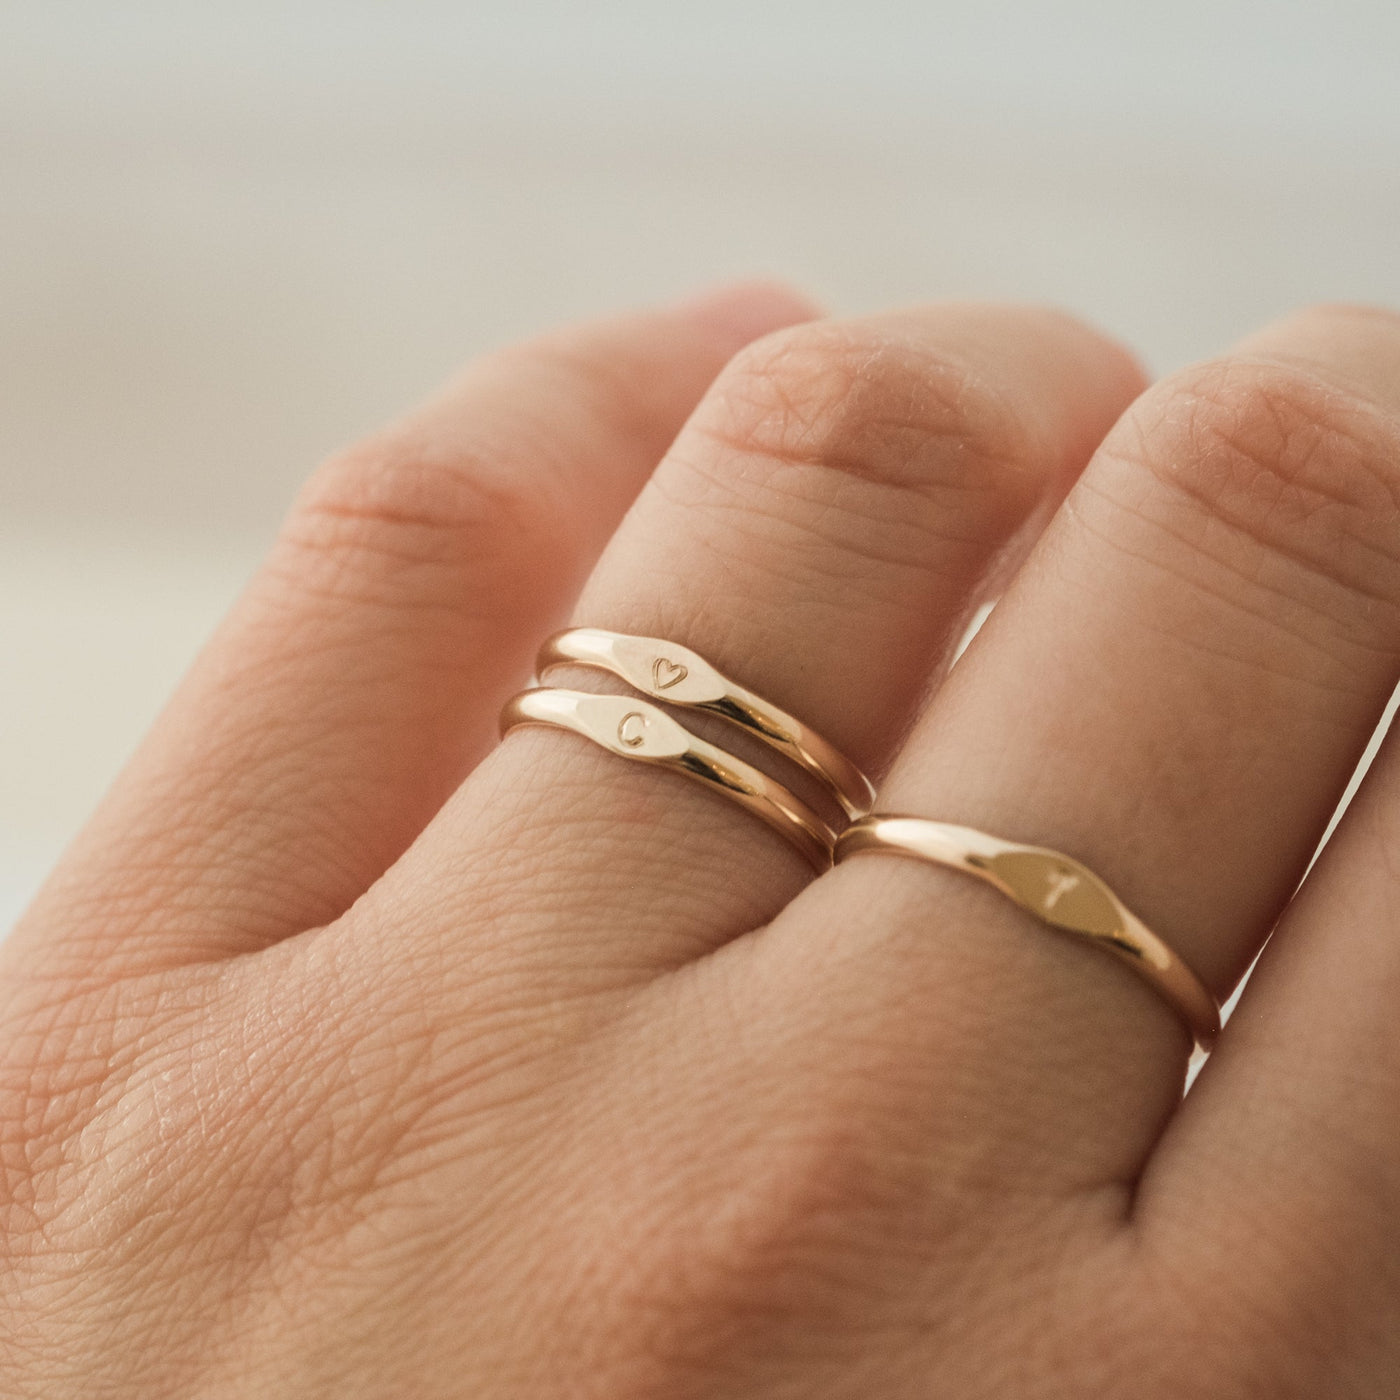 Initial Signet Ring | Simple & Dainty Jewelry